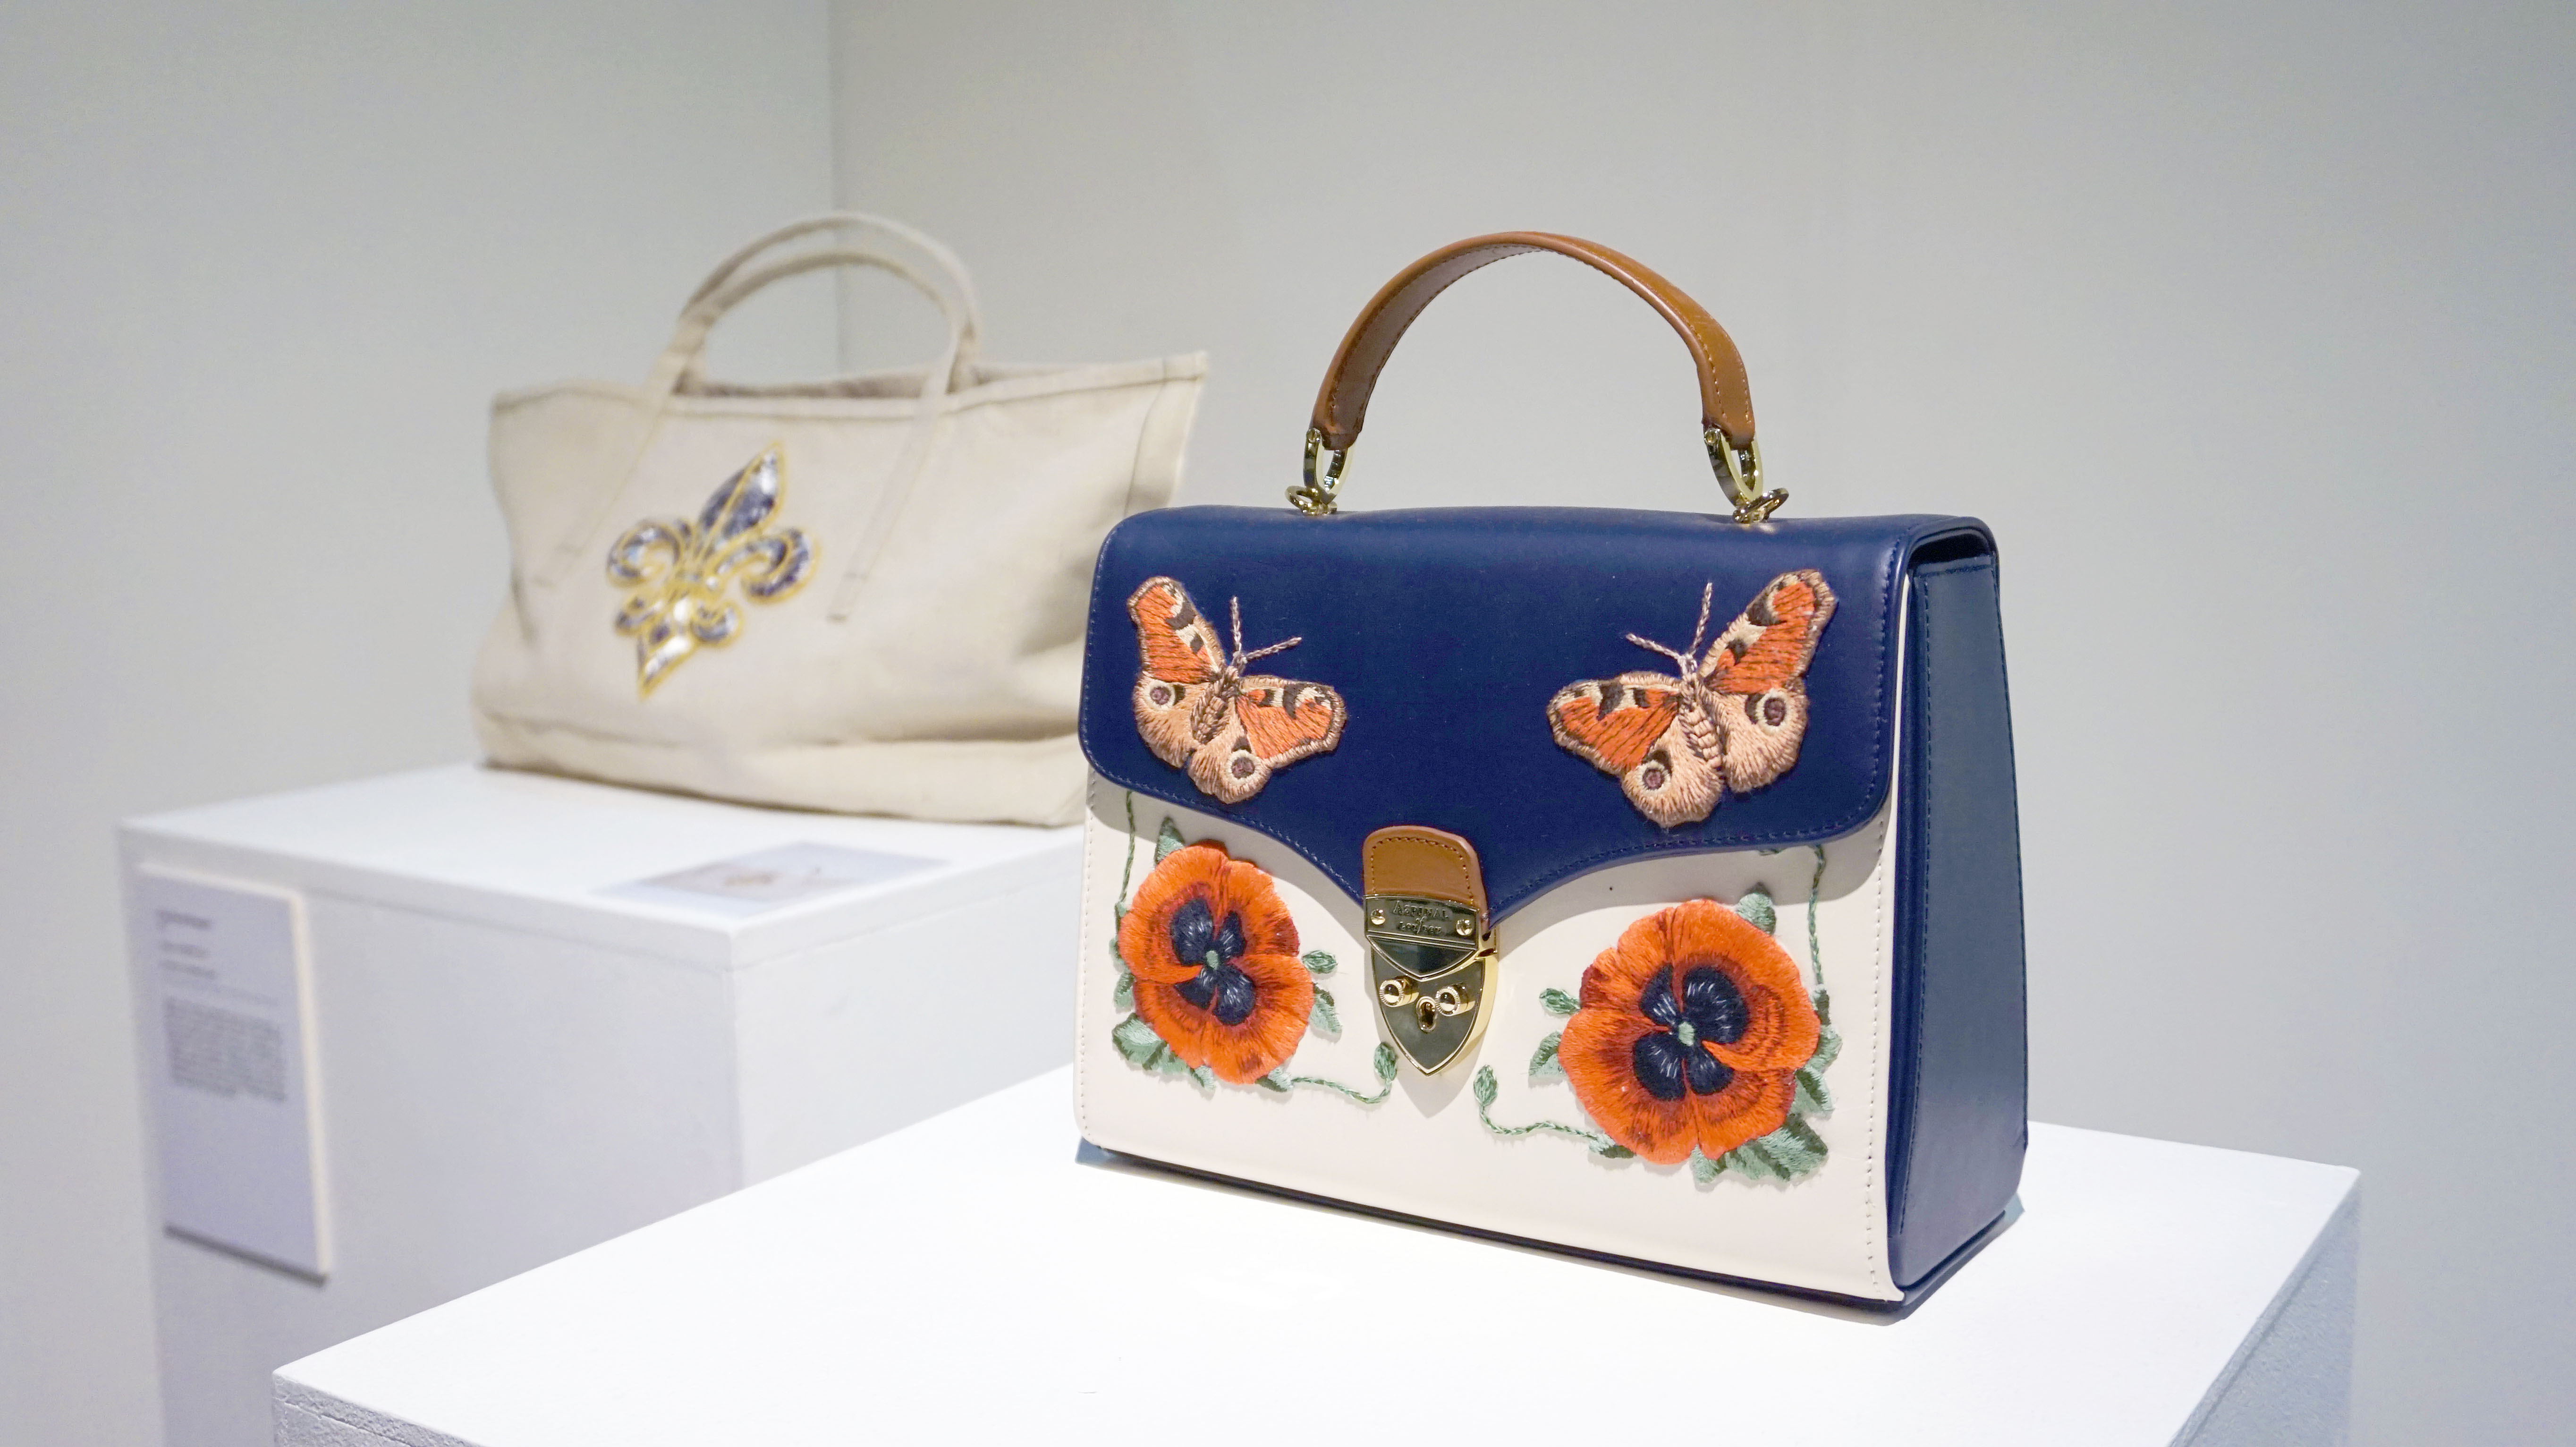 Butterfly Handbag at the Knitting and Stitching Show 2017